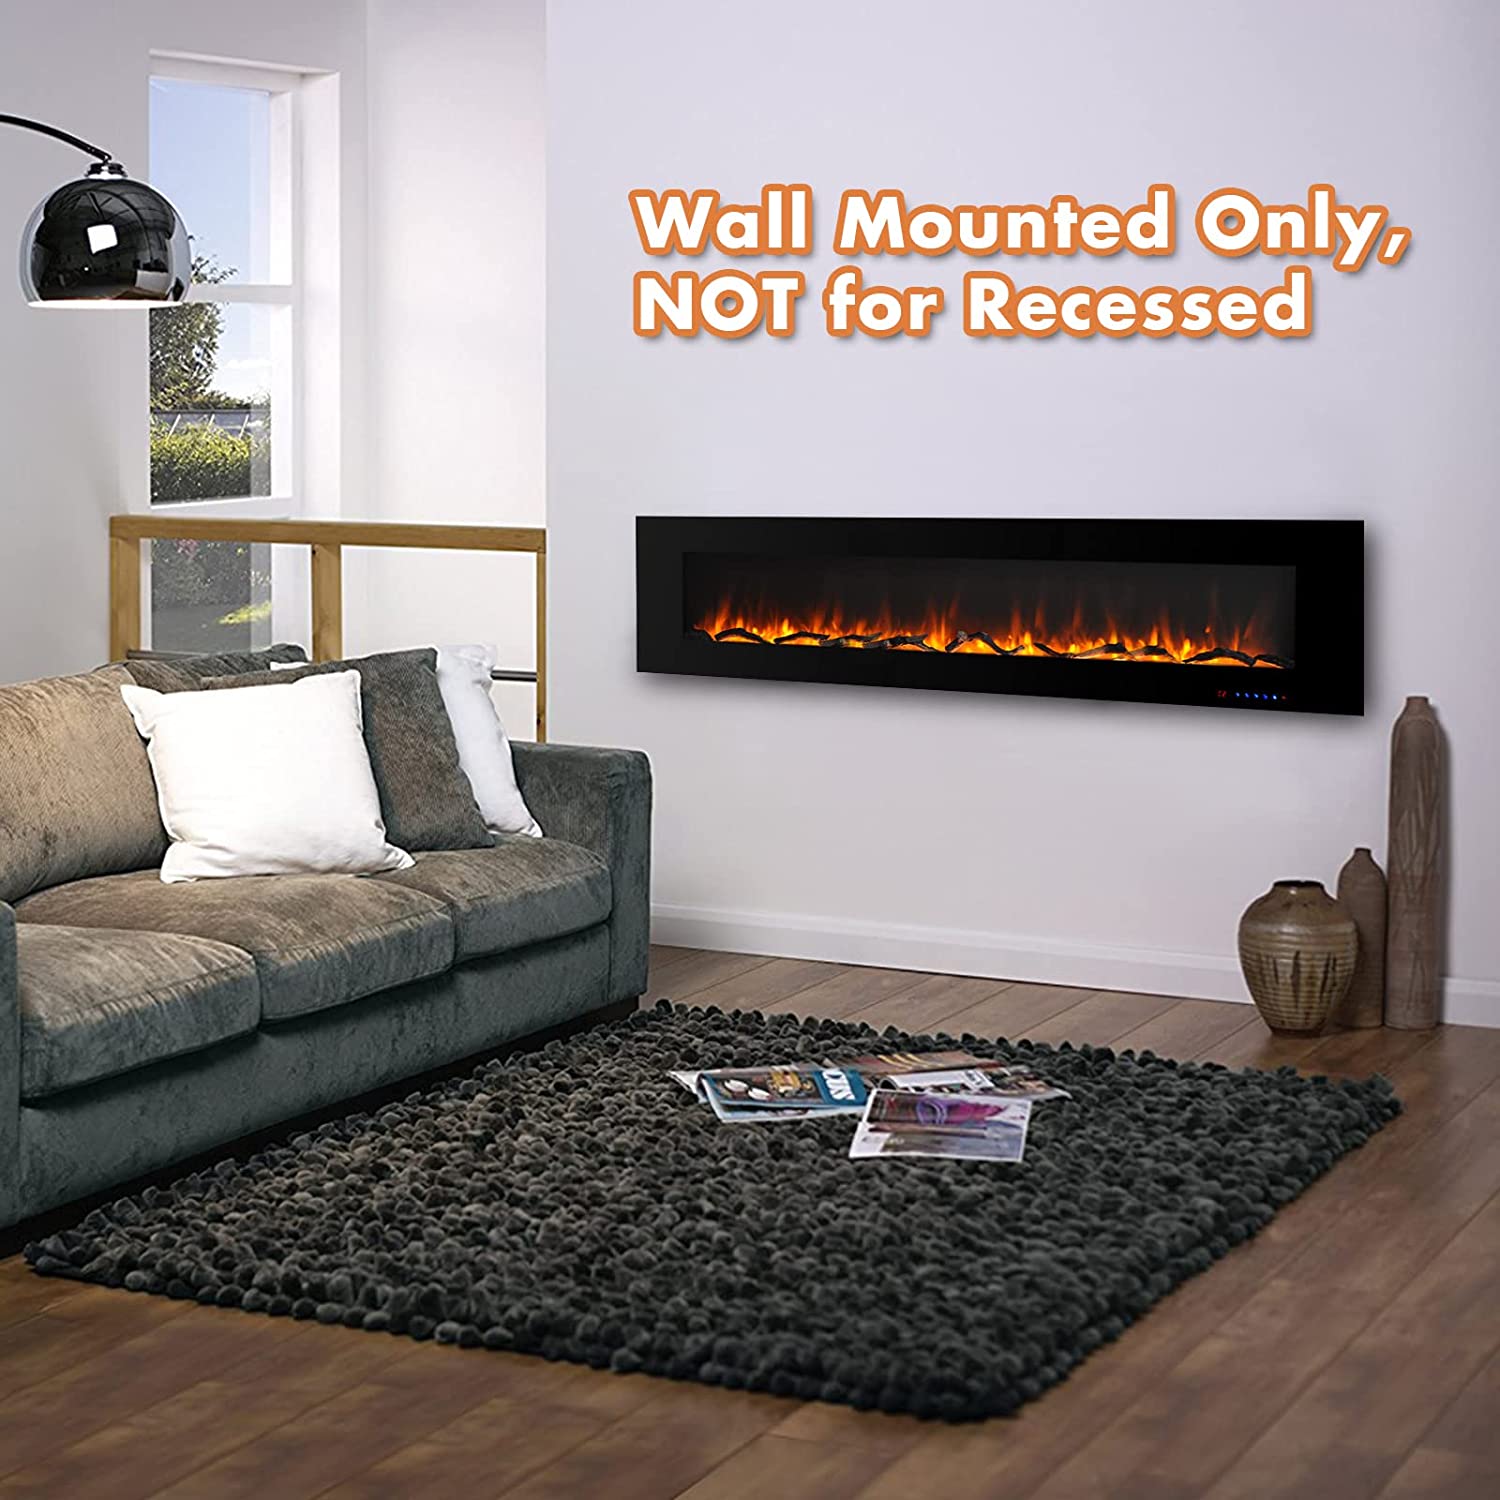 Valuxhome WM84 84 in. 750/1500W Wall Mounted Log and Crystals Fireplace with Remote Black New